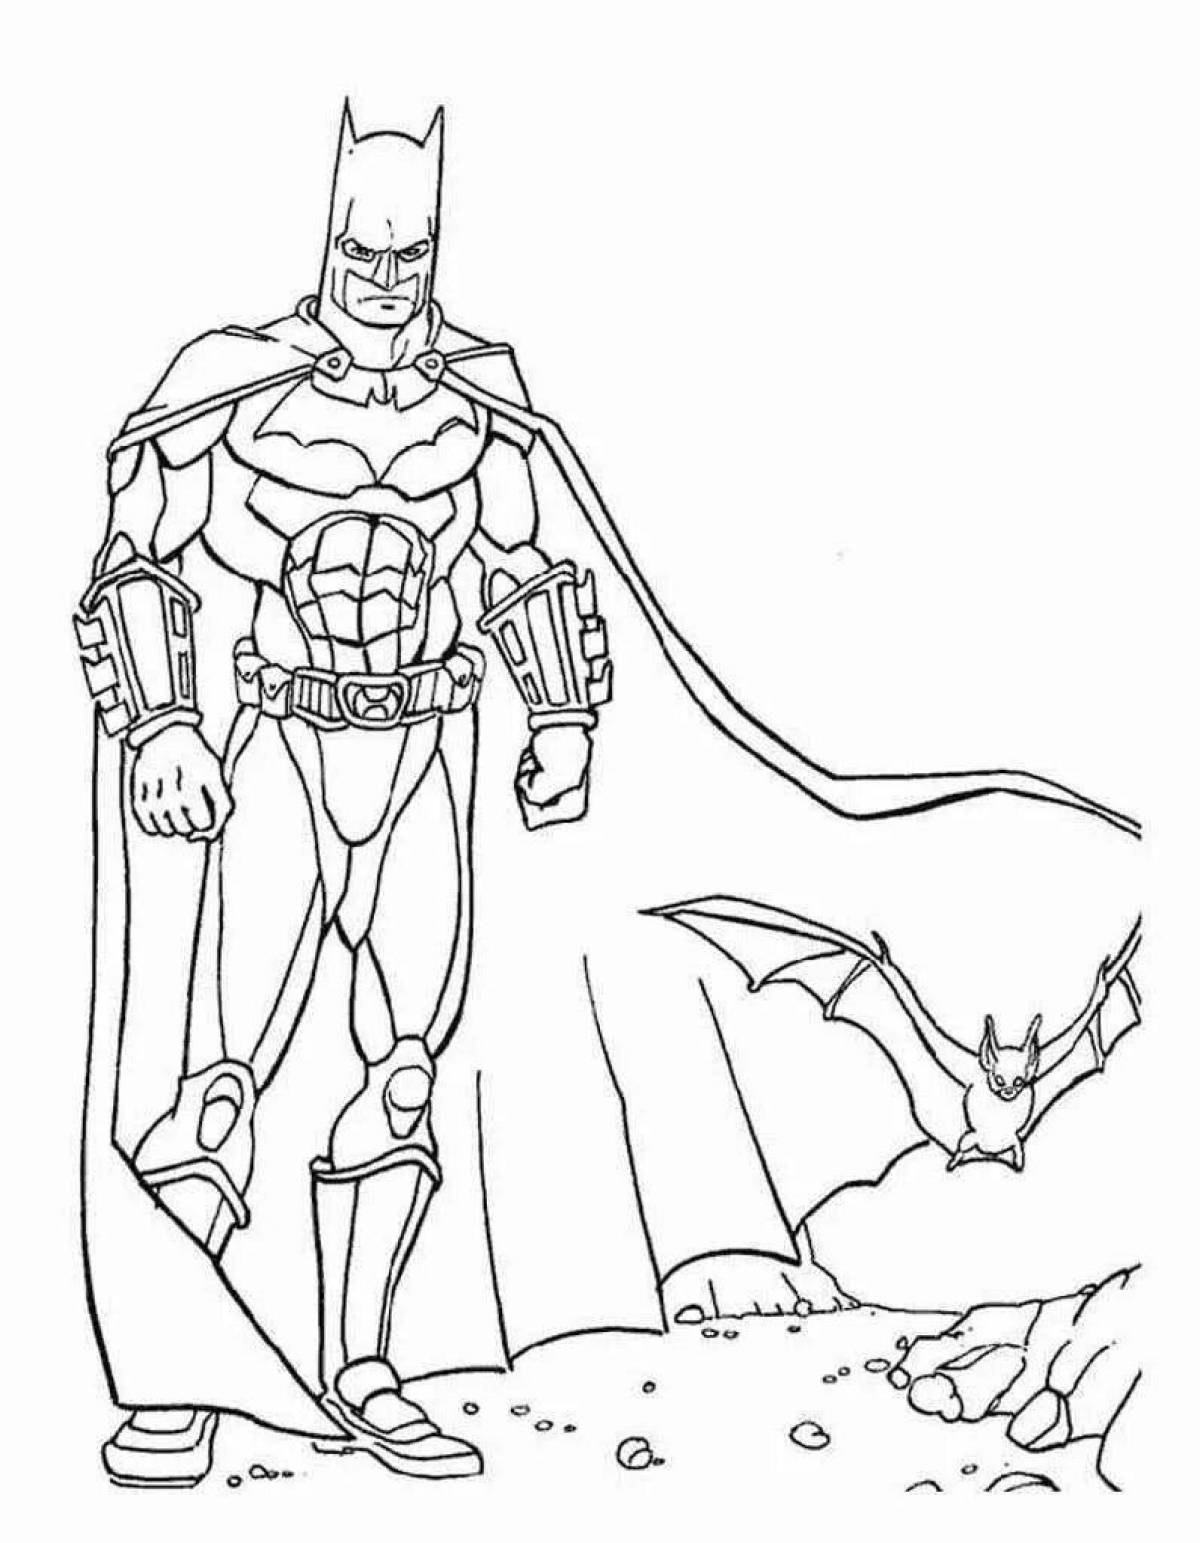 Colorful superhero coloring pages for kids 5-6 years old